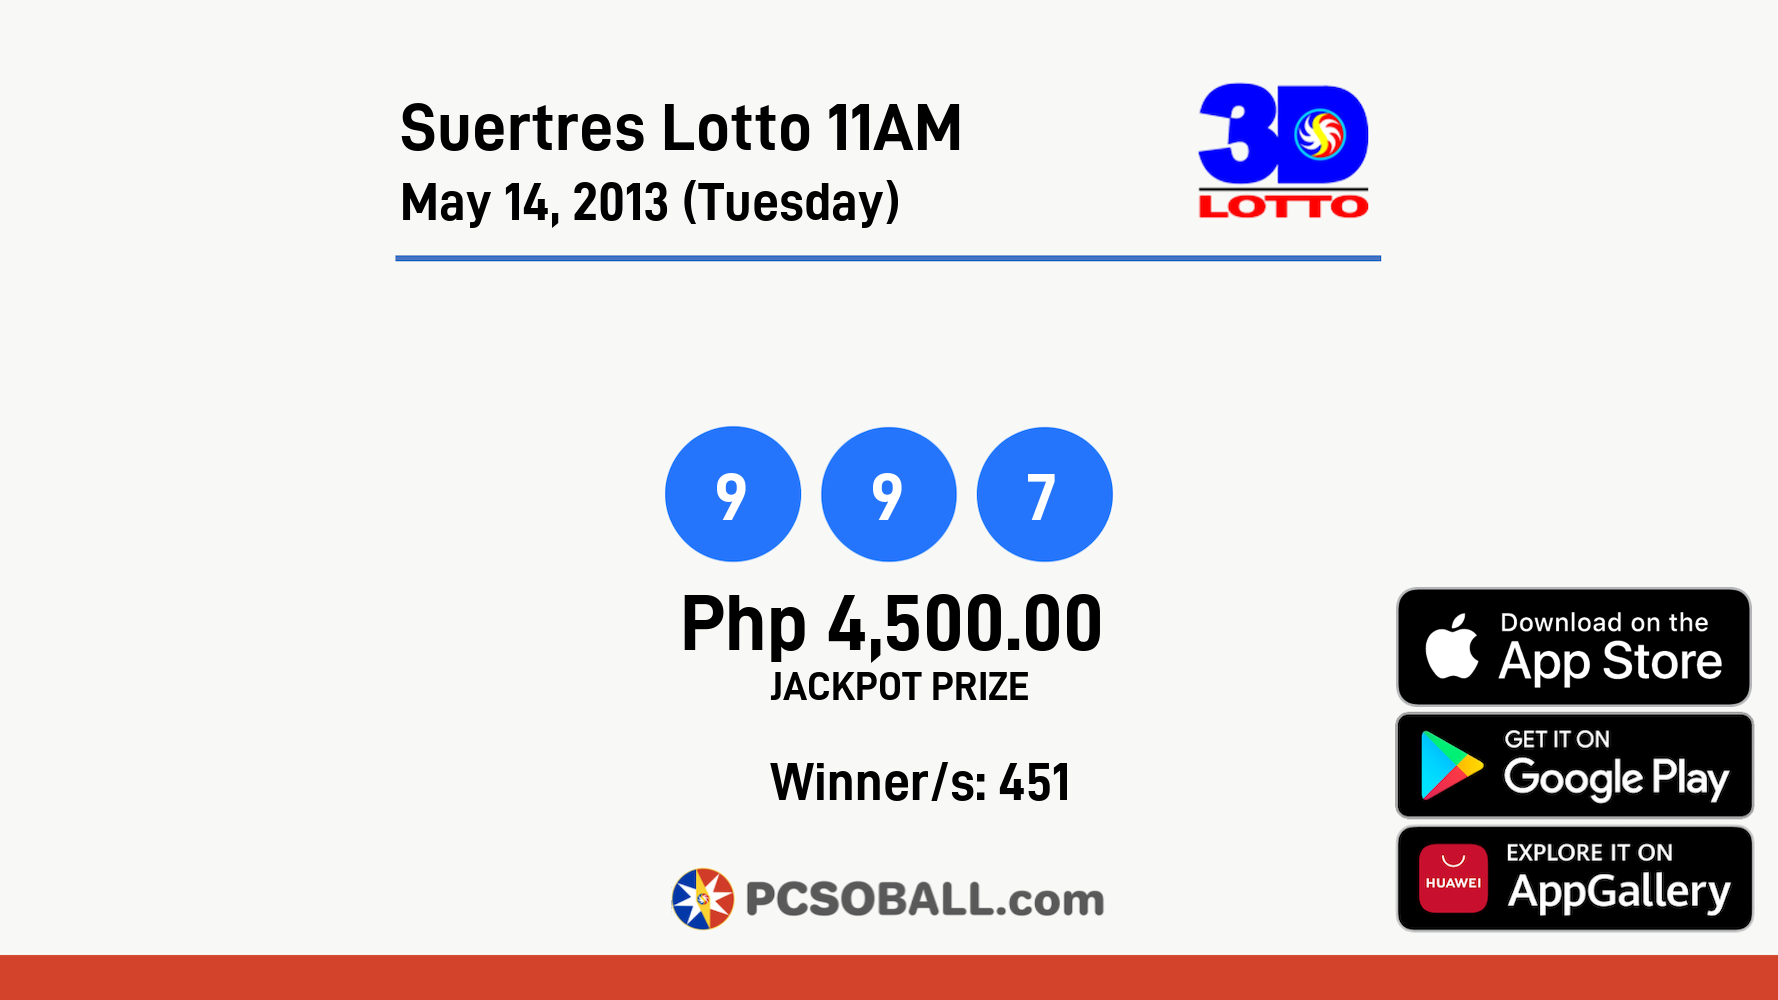 Suertres Lotto 11AM May 14, 2013 (Tuesday) Result